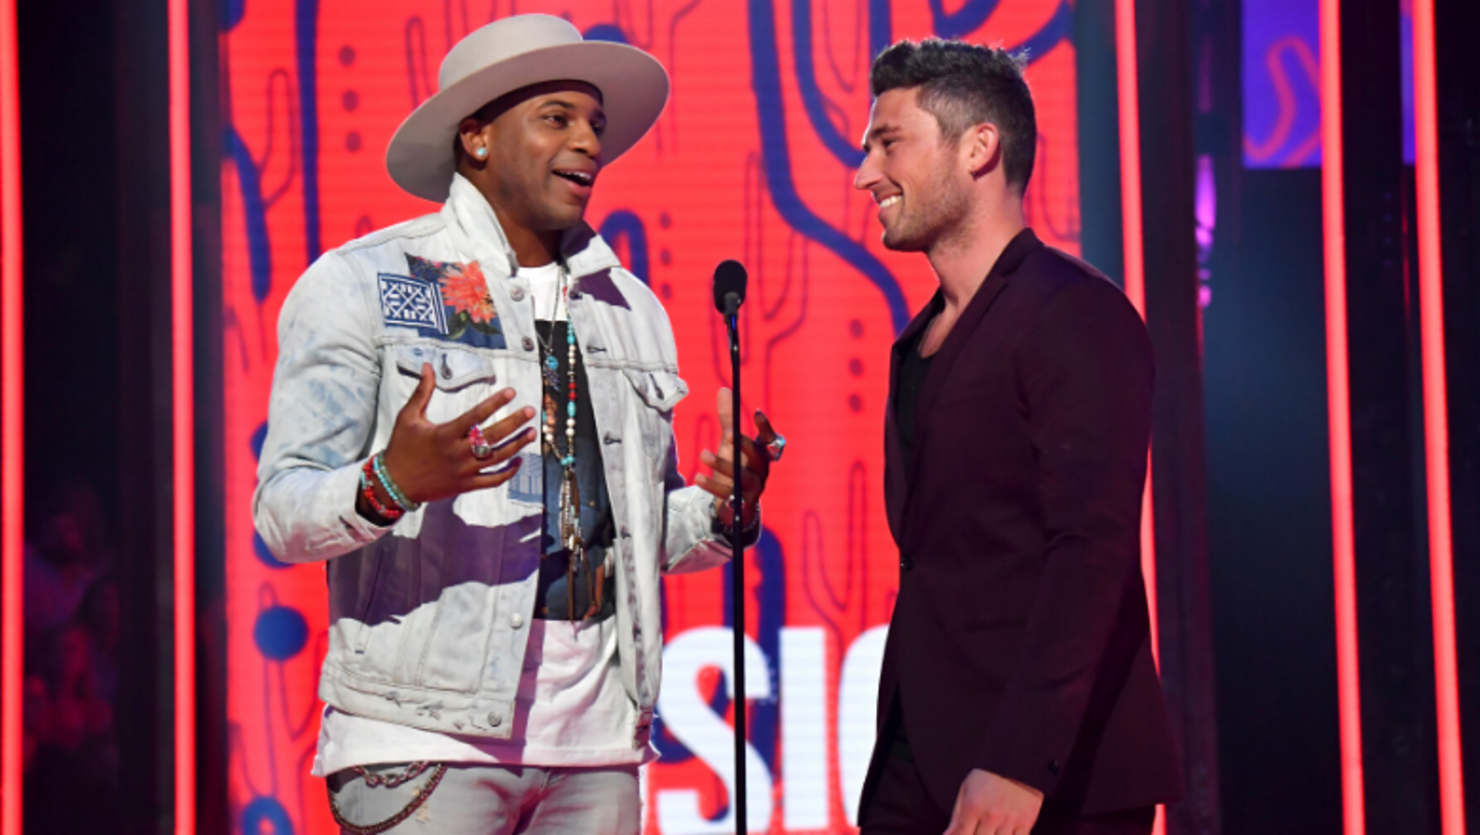 Jimmie Allen Gives Michael Ray Parenting Advice For The Future